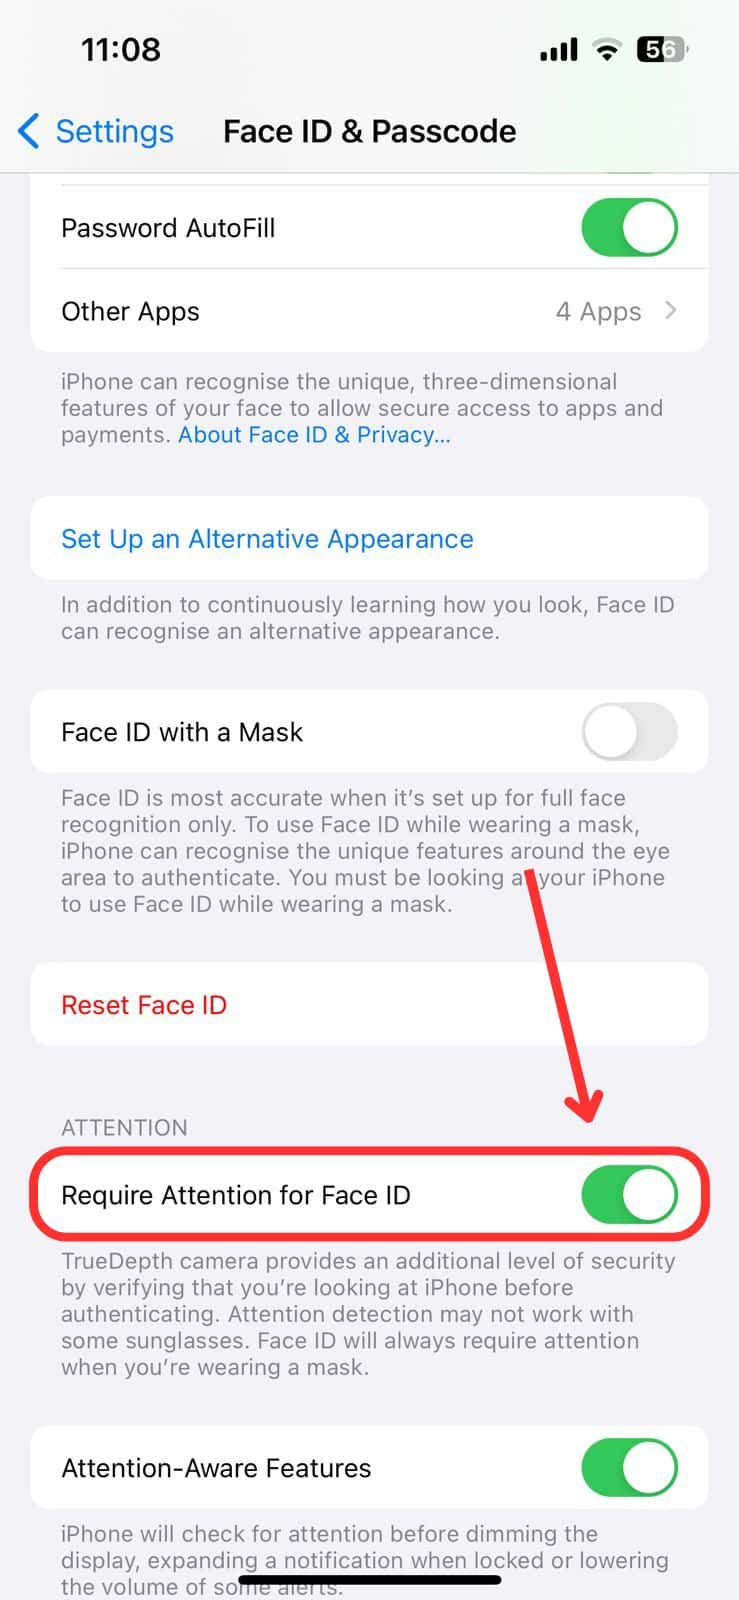 Turn off Require Attention for Face ID